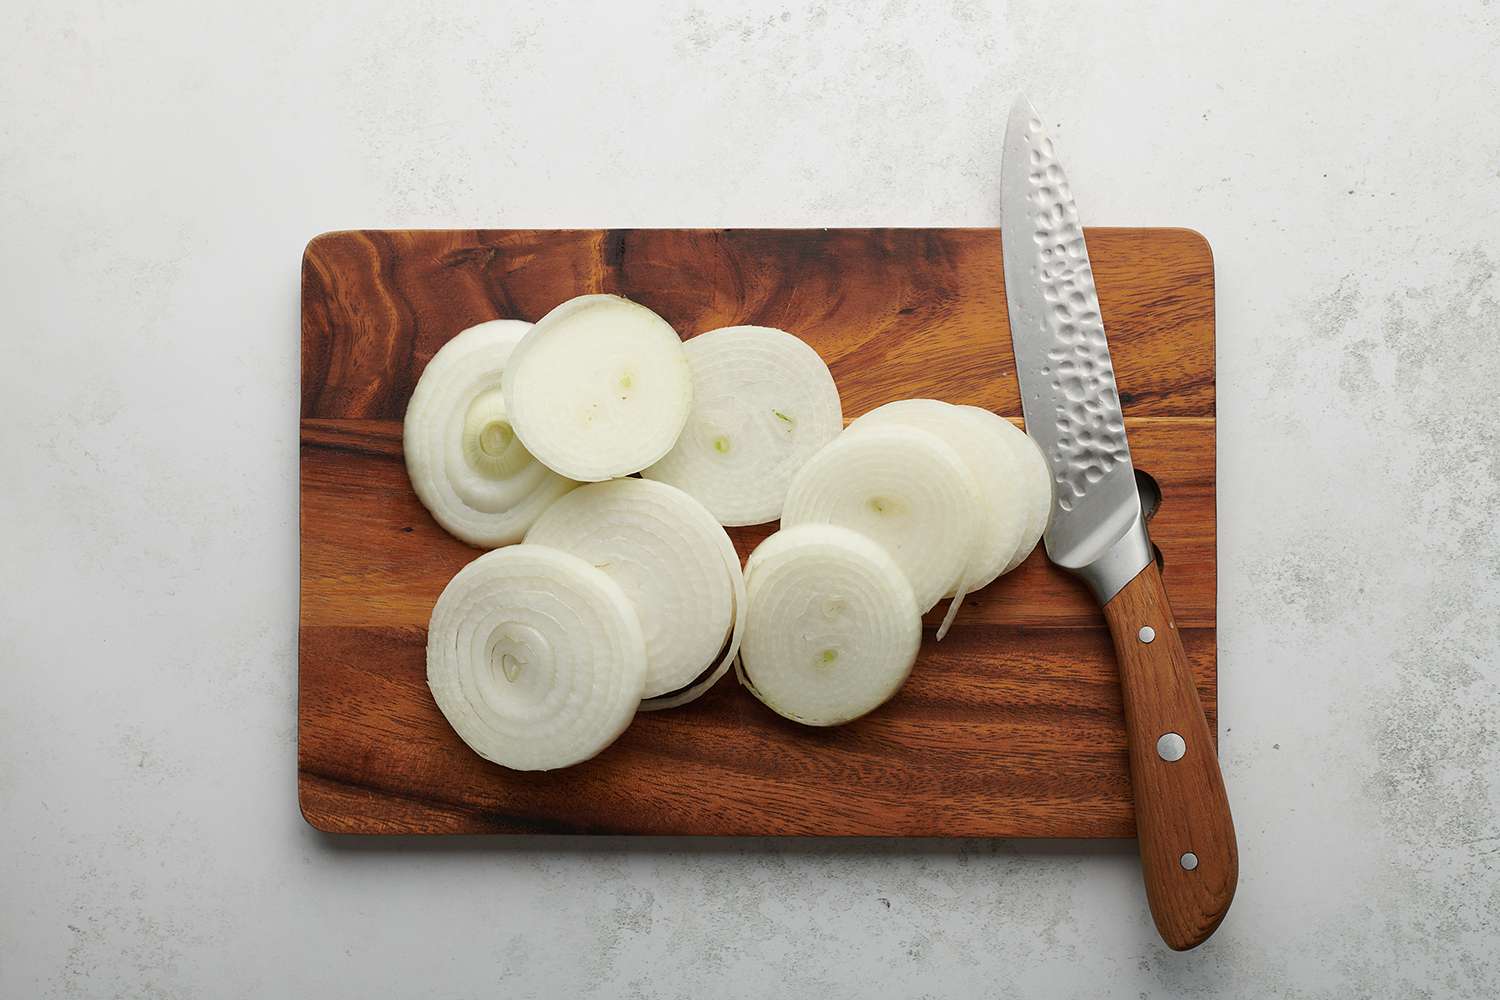 Different ways of cutting onions and their importance in cooking